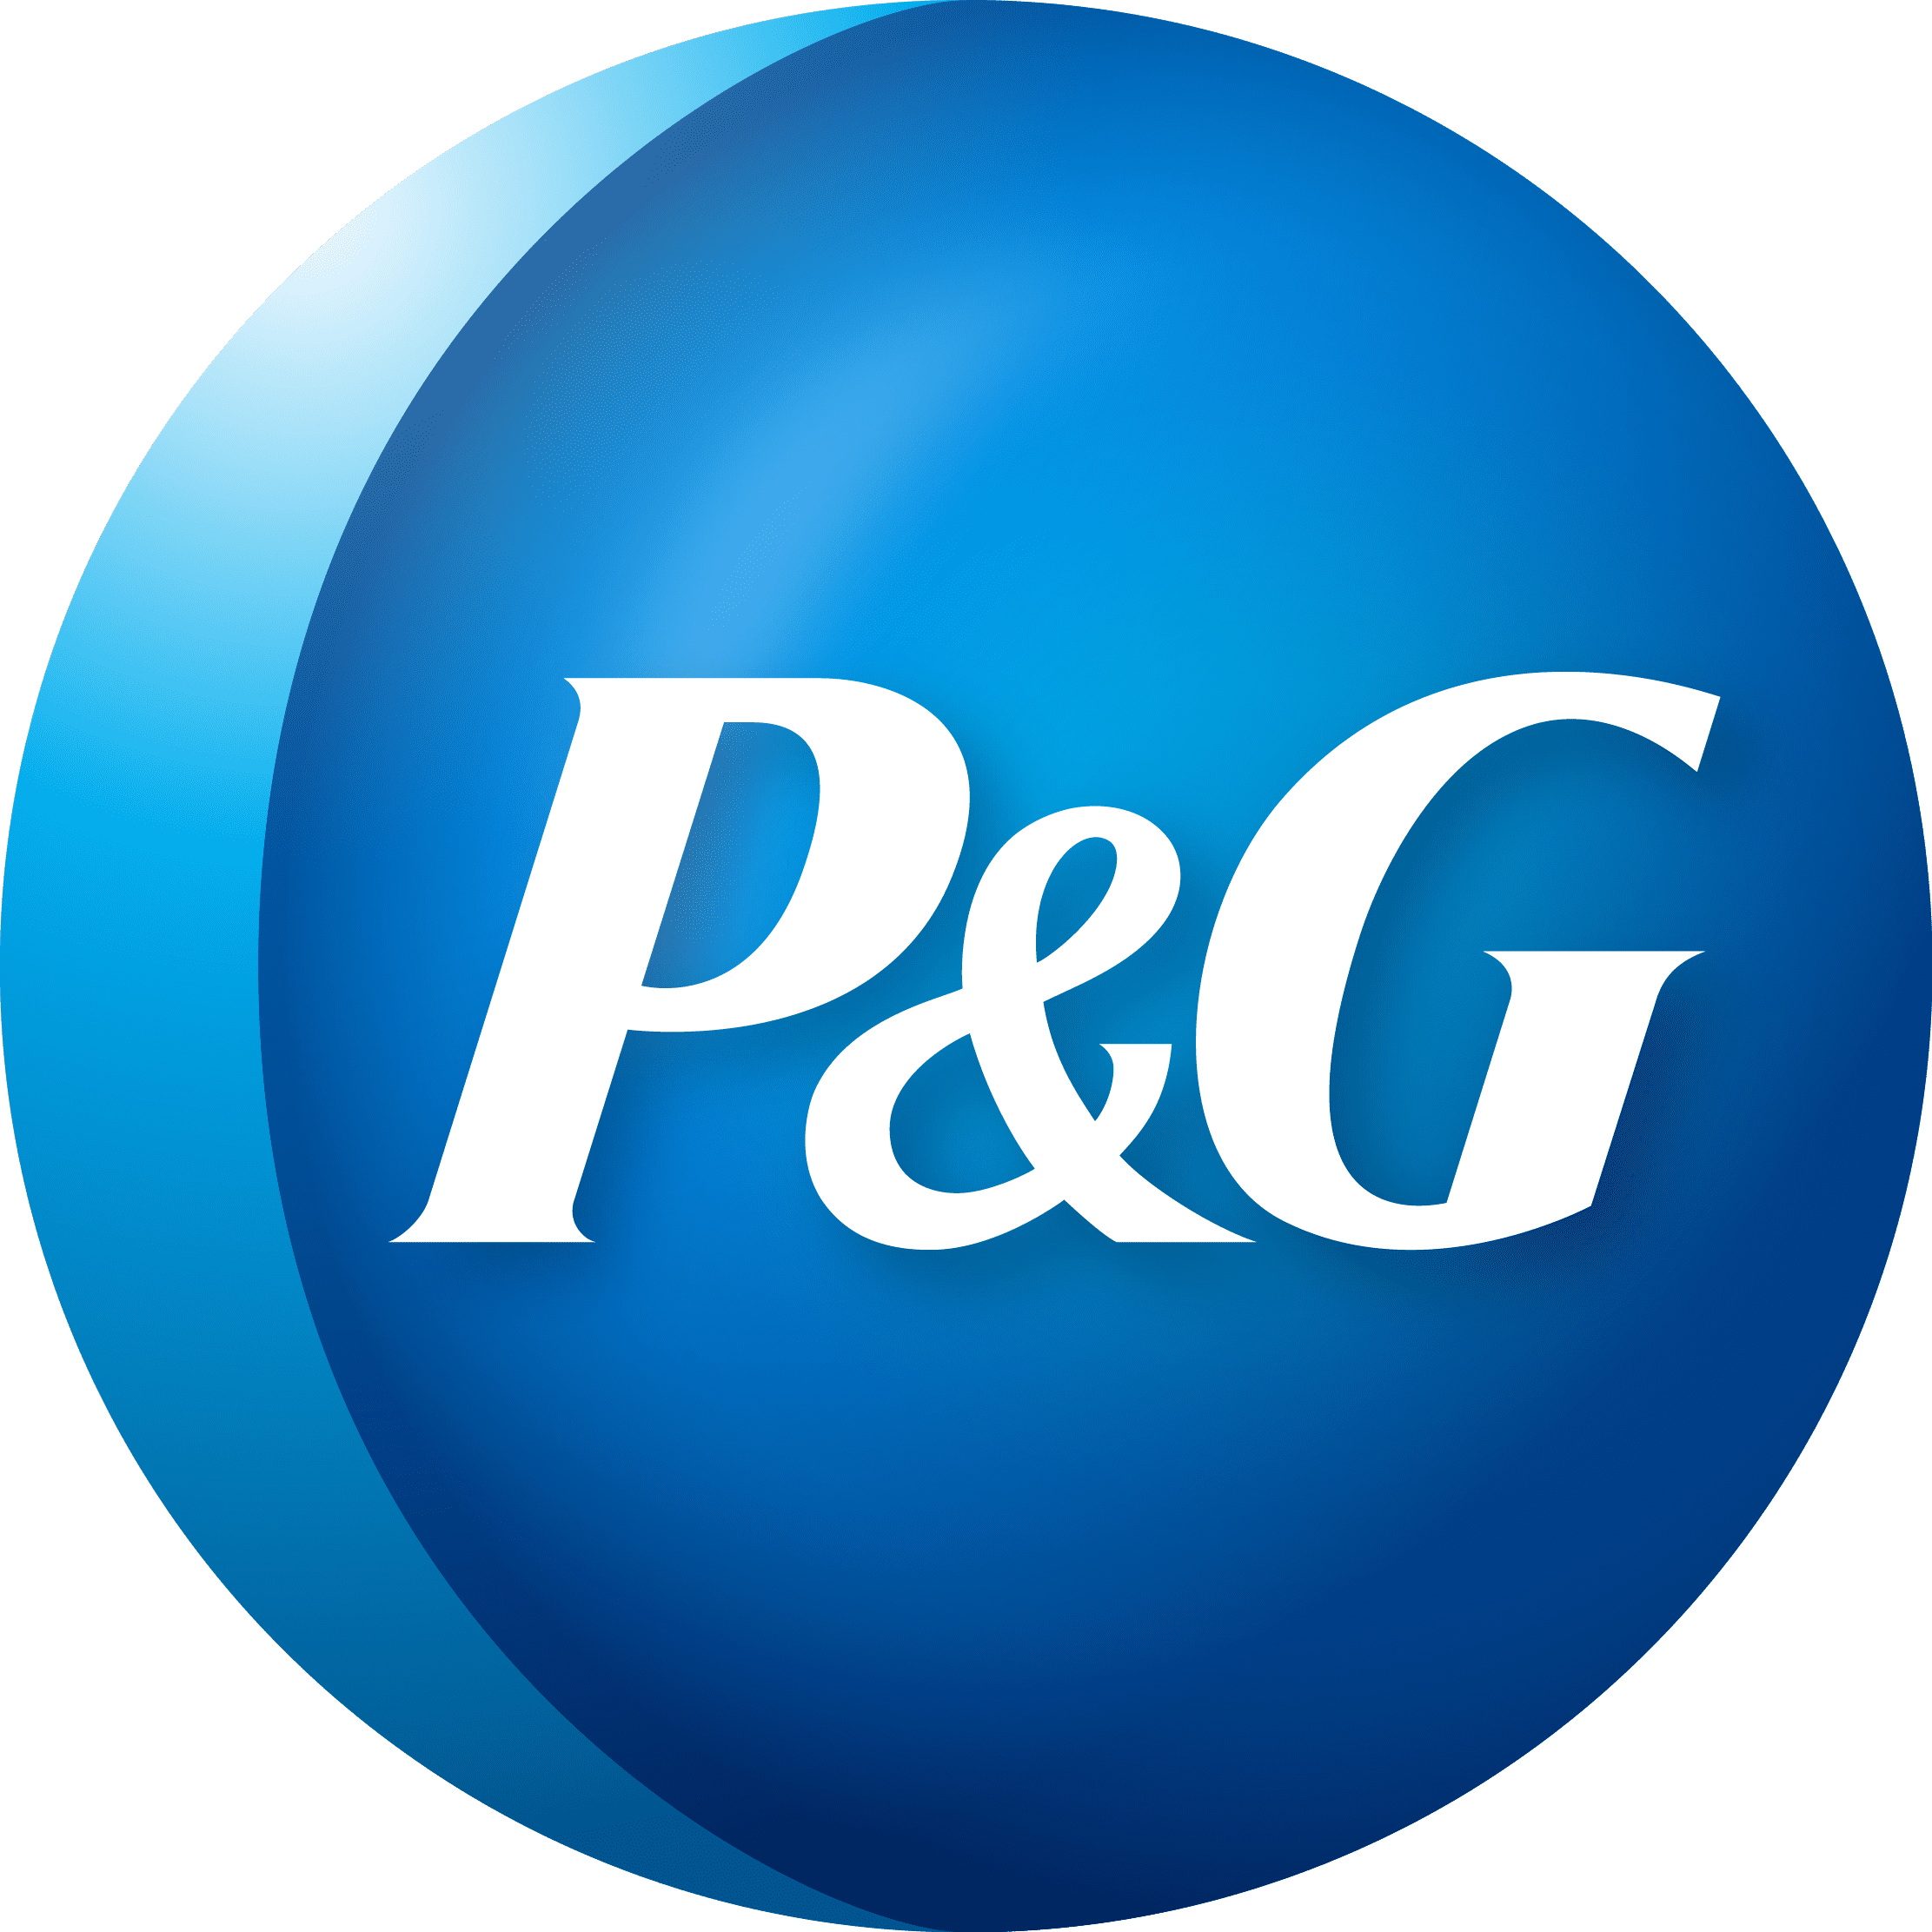 Download P&G Logo PNG Image for Free